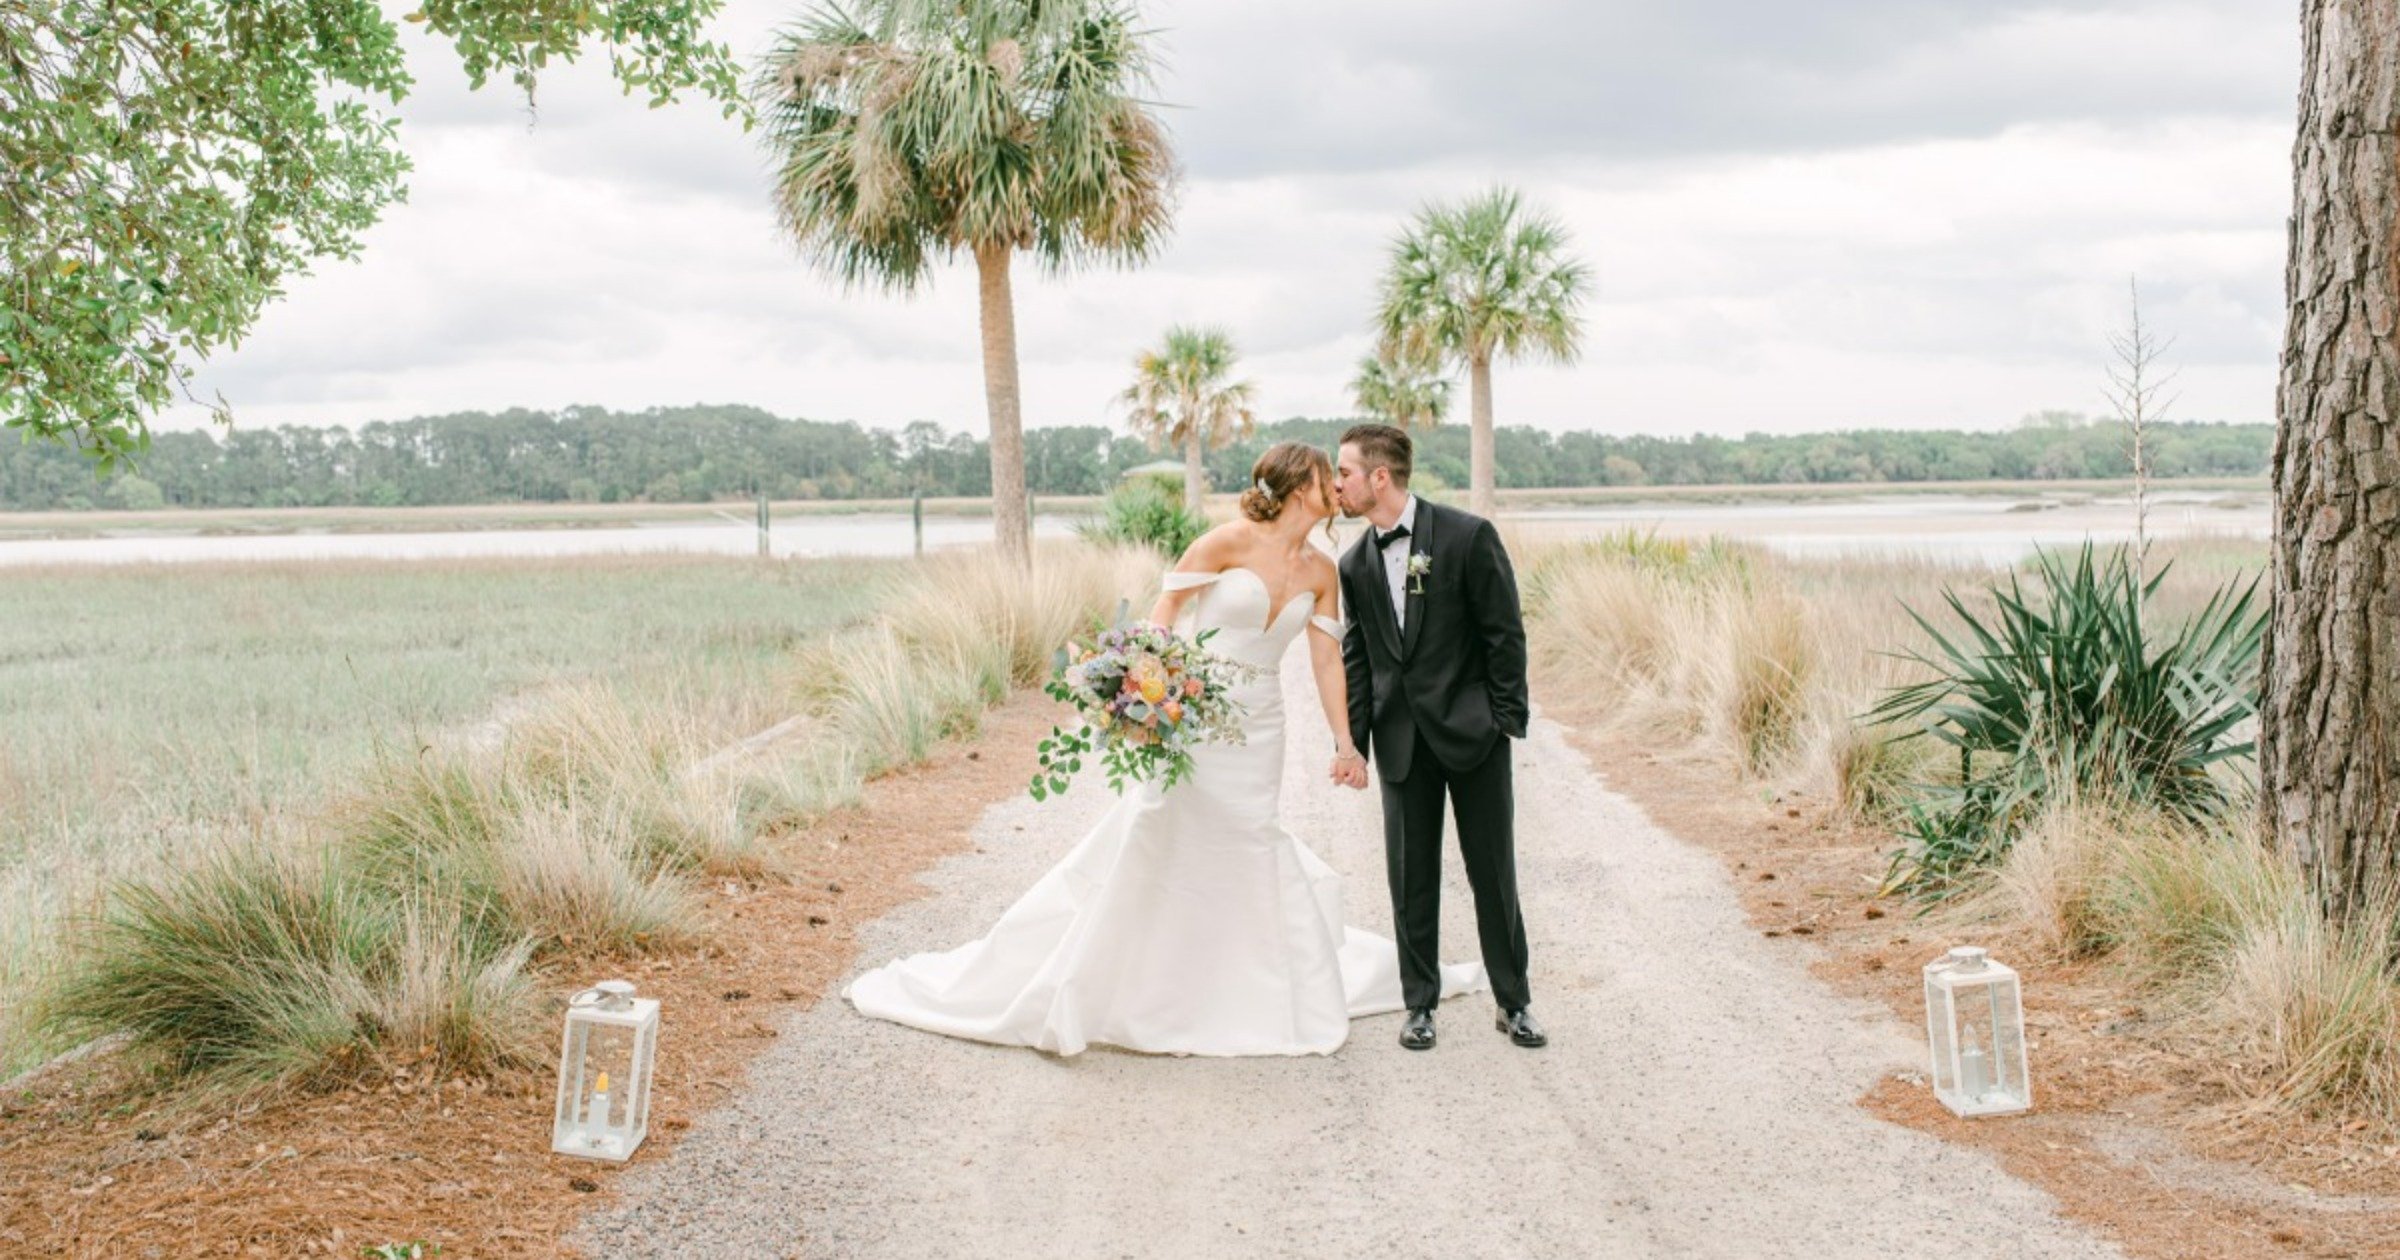 Let's Toast to This Bridgerton-Inspired, Tented Spring Wedding